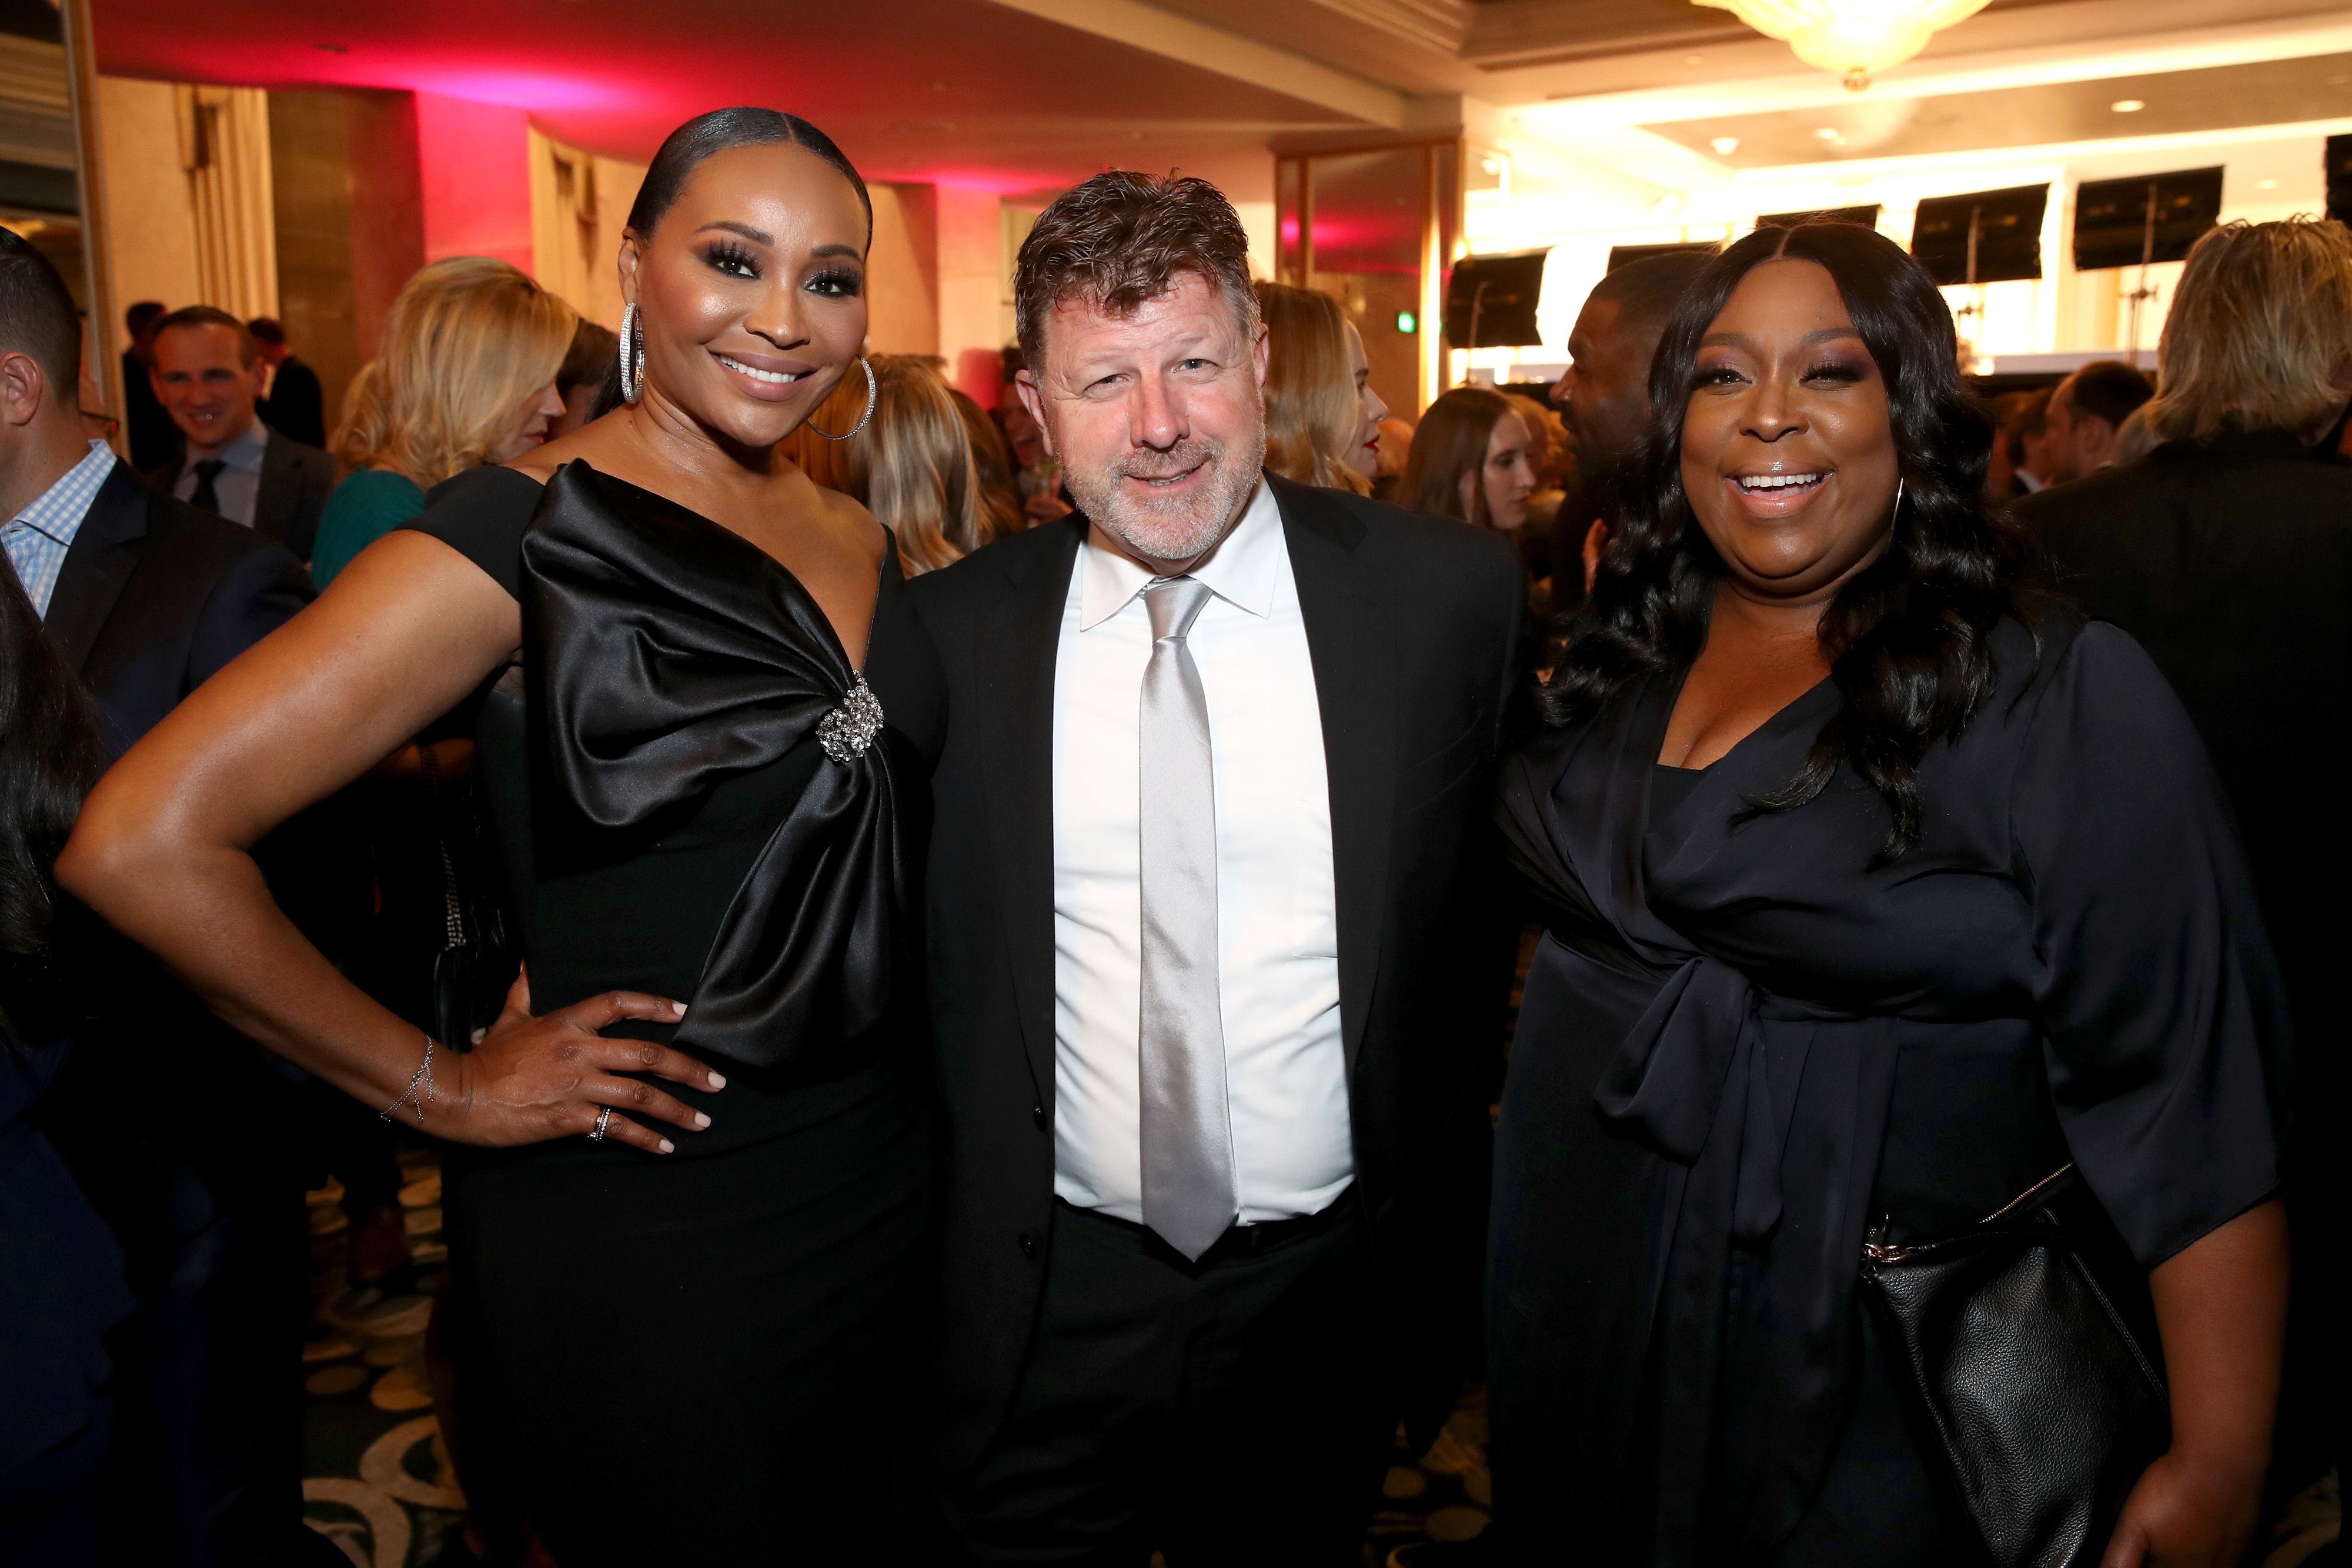 Cynthia Bailey, James Welsh, and Loni Love attend WCRF's "An Unforgettable Evening" at Beverly Wilshire, A Four Seasons Hotel on February 27, 2020 in Beverly Hills, California. | Source: Getty Images